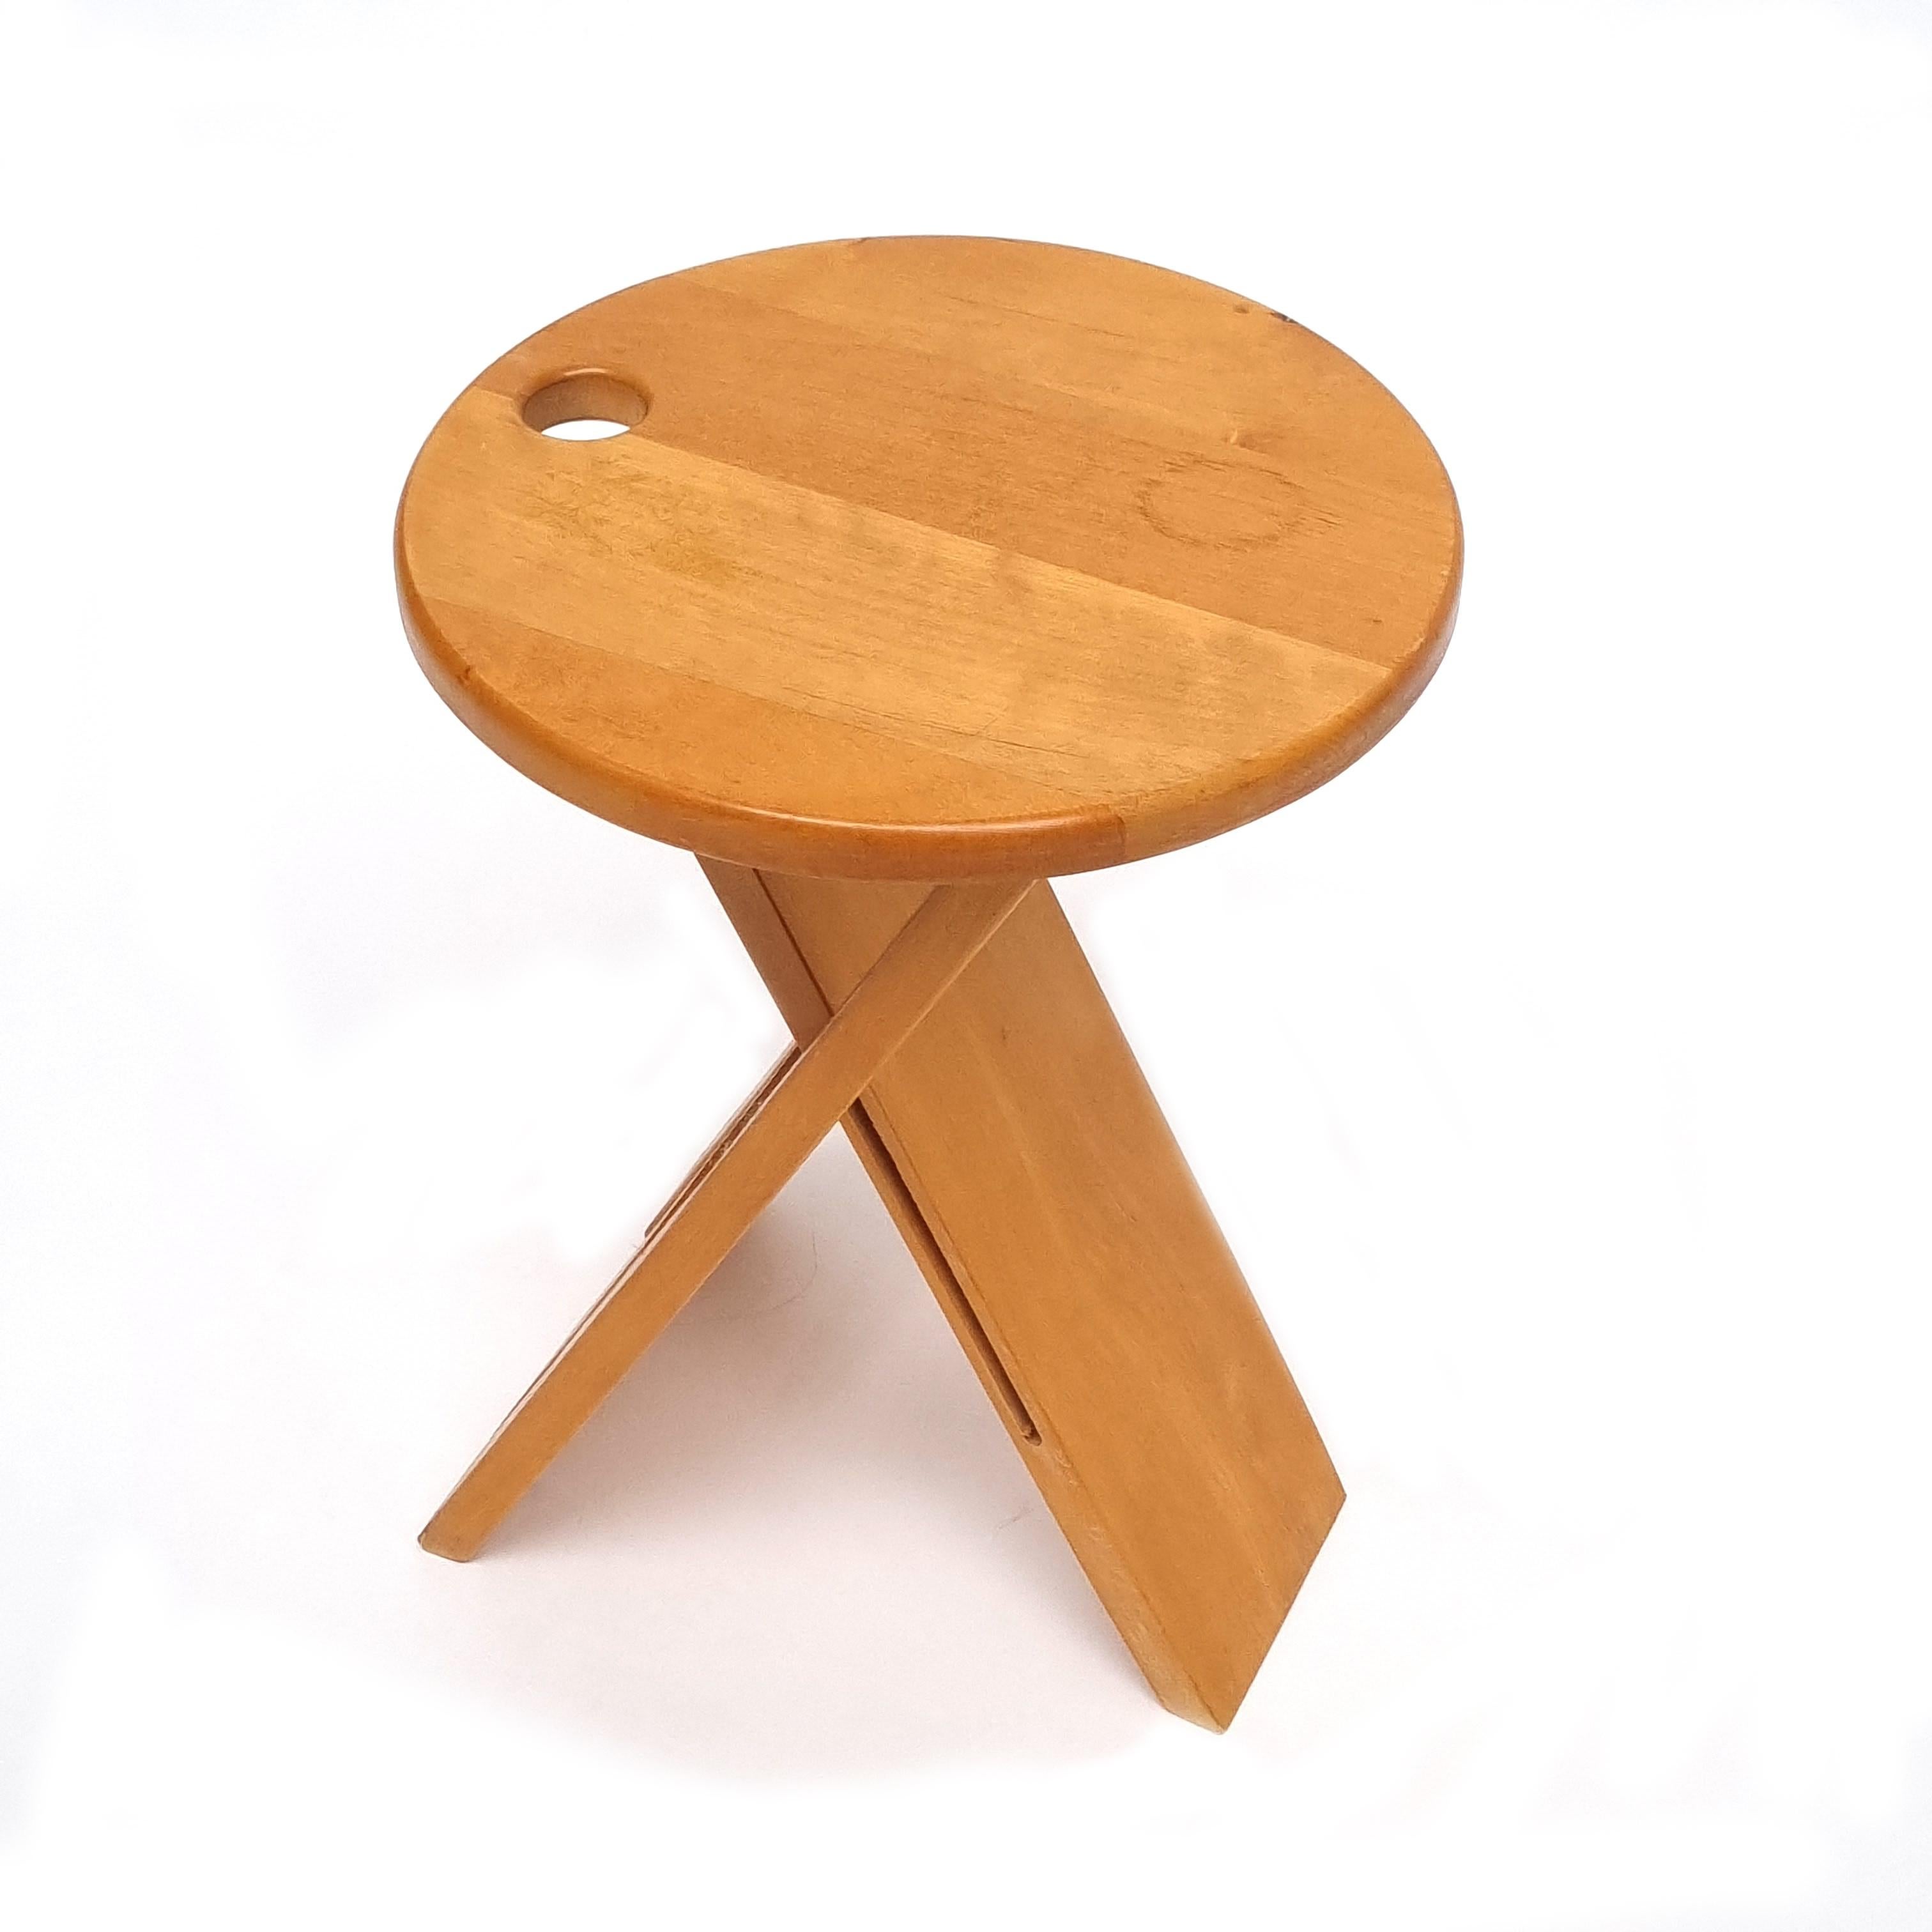 This pine stool from the 1980s has a Minimalist design. Designed by Adrian Reed for Princes Design Works Limited in London in 1984. It is foldable and has a hole allowing its suspension for optimal space saving. It is made of solid pine, foldable